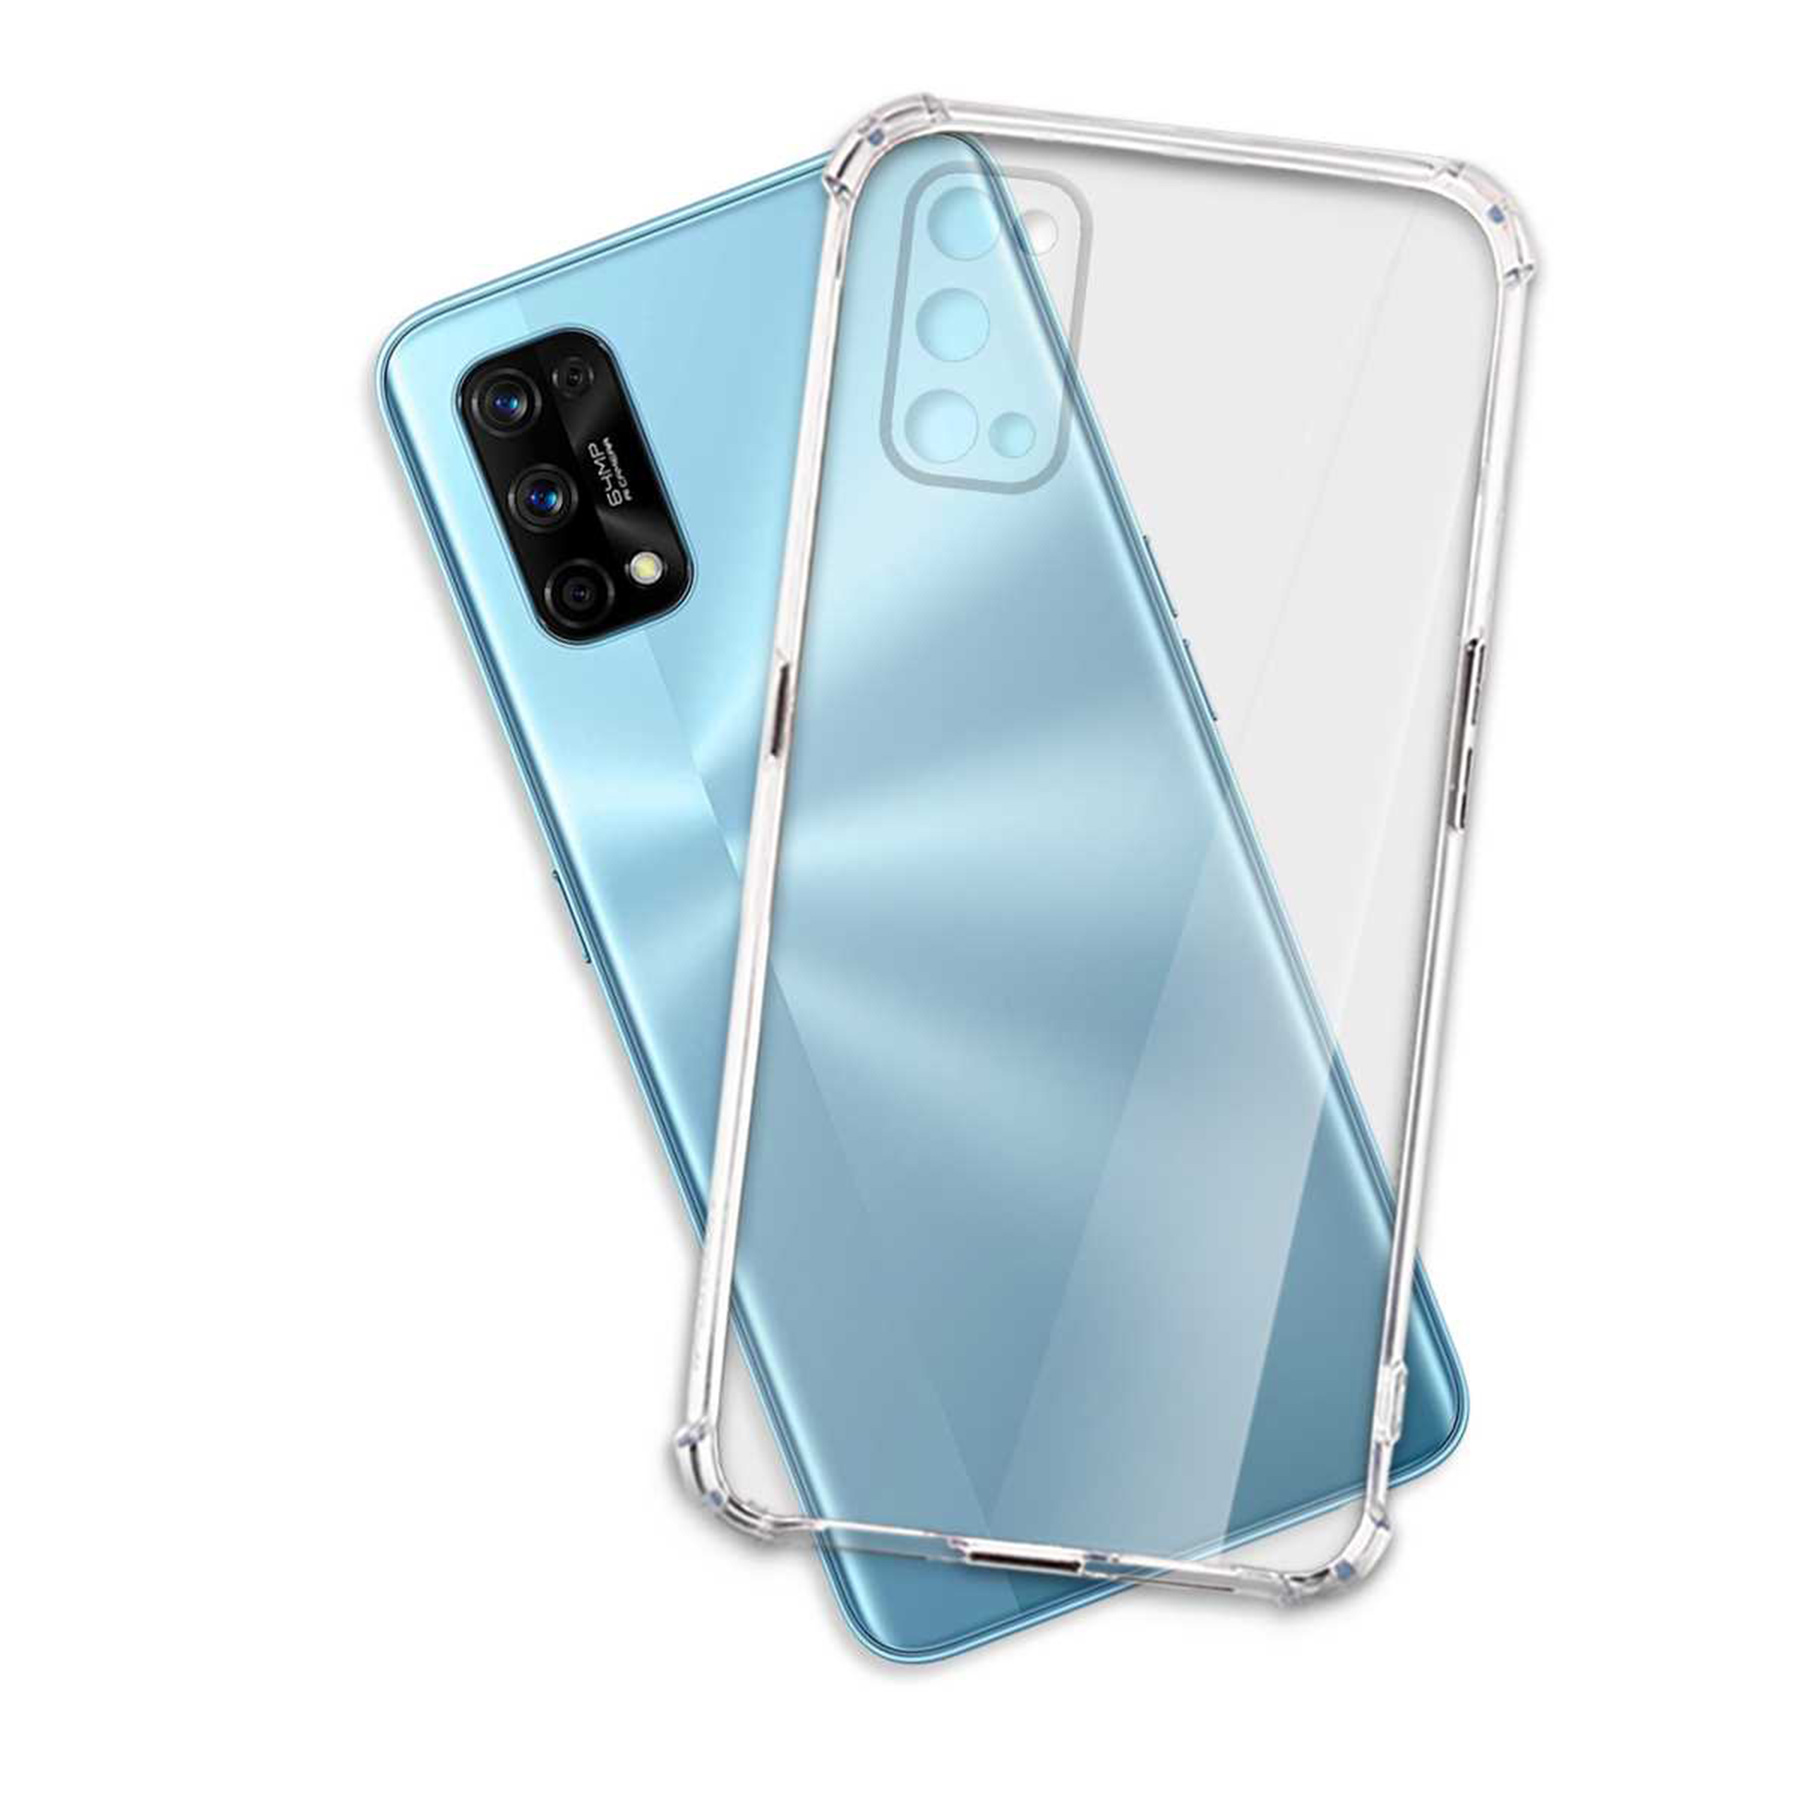 MTB MORE ENERGY Clear Armor Case, Transparent Realme, X7 Backcover, Pro